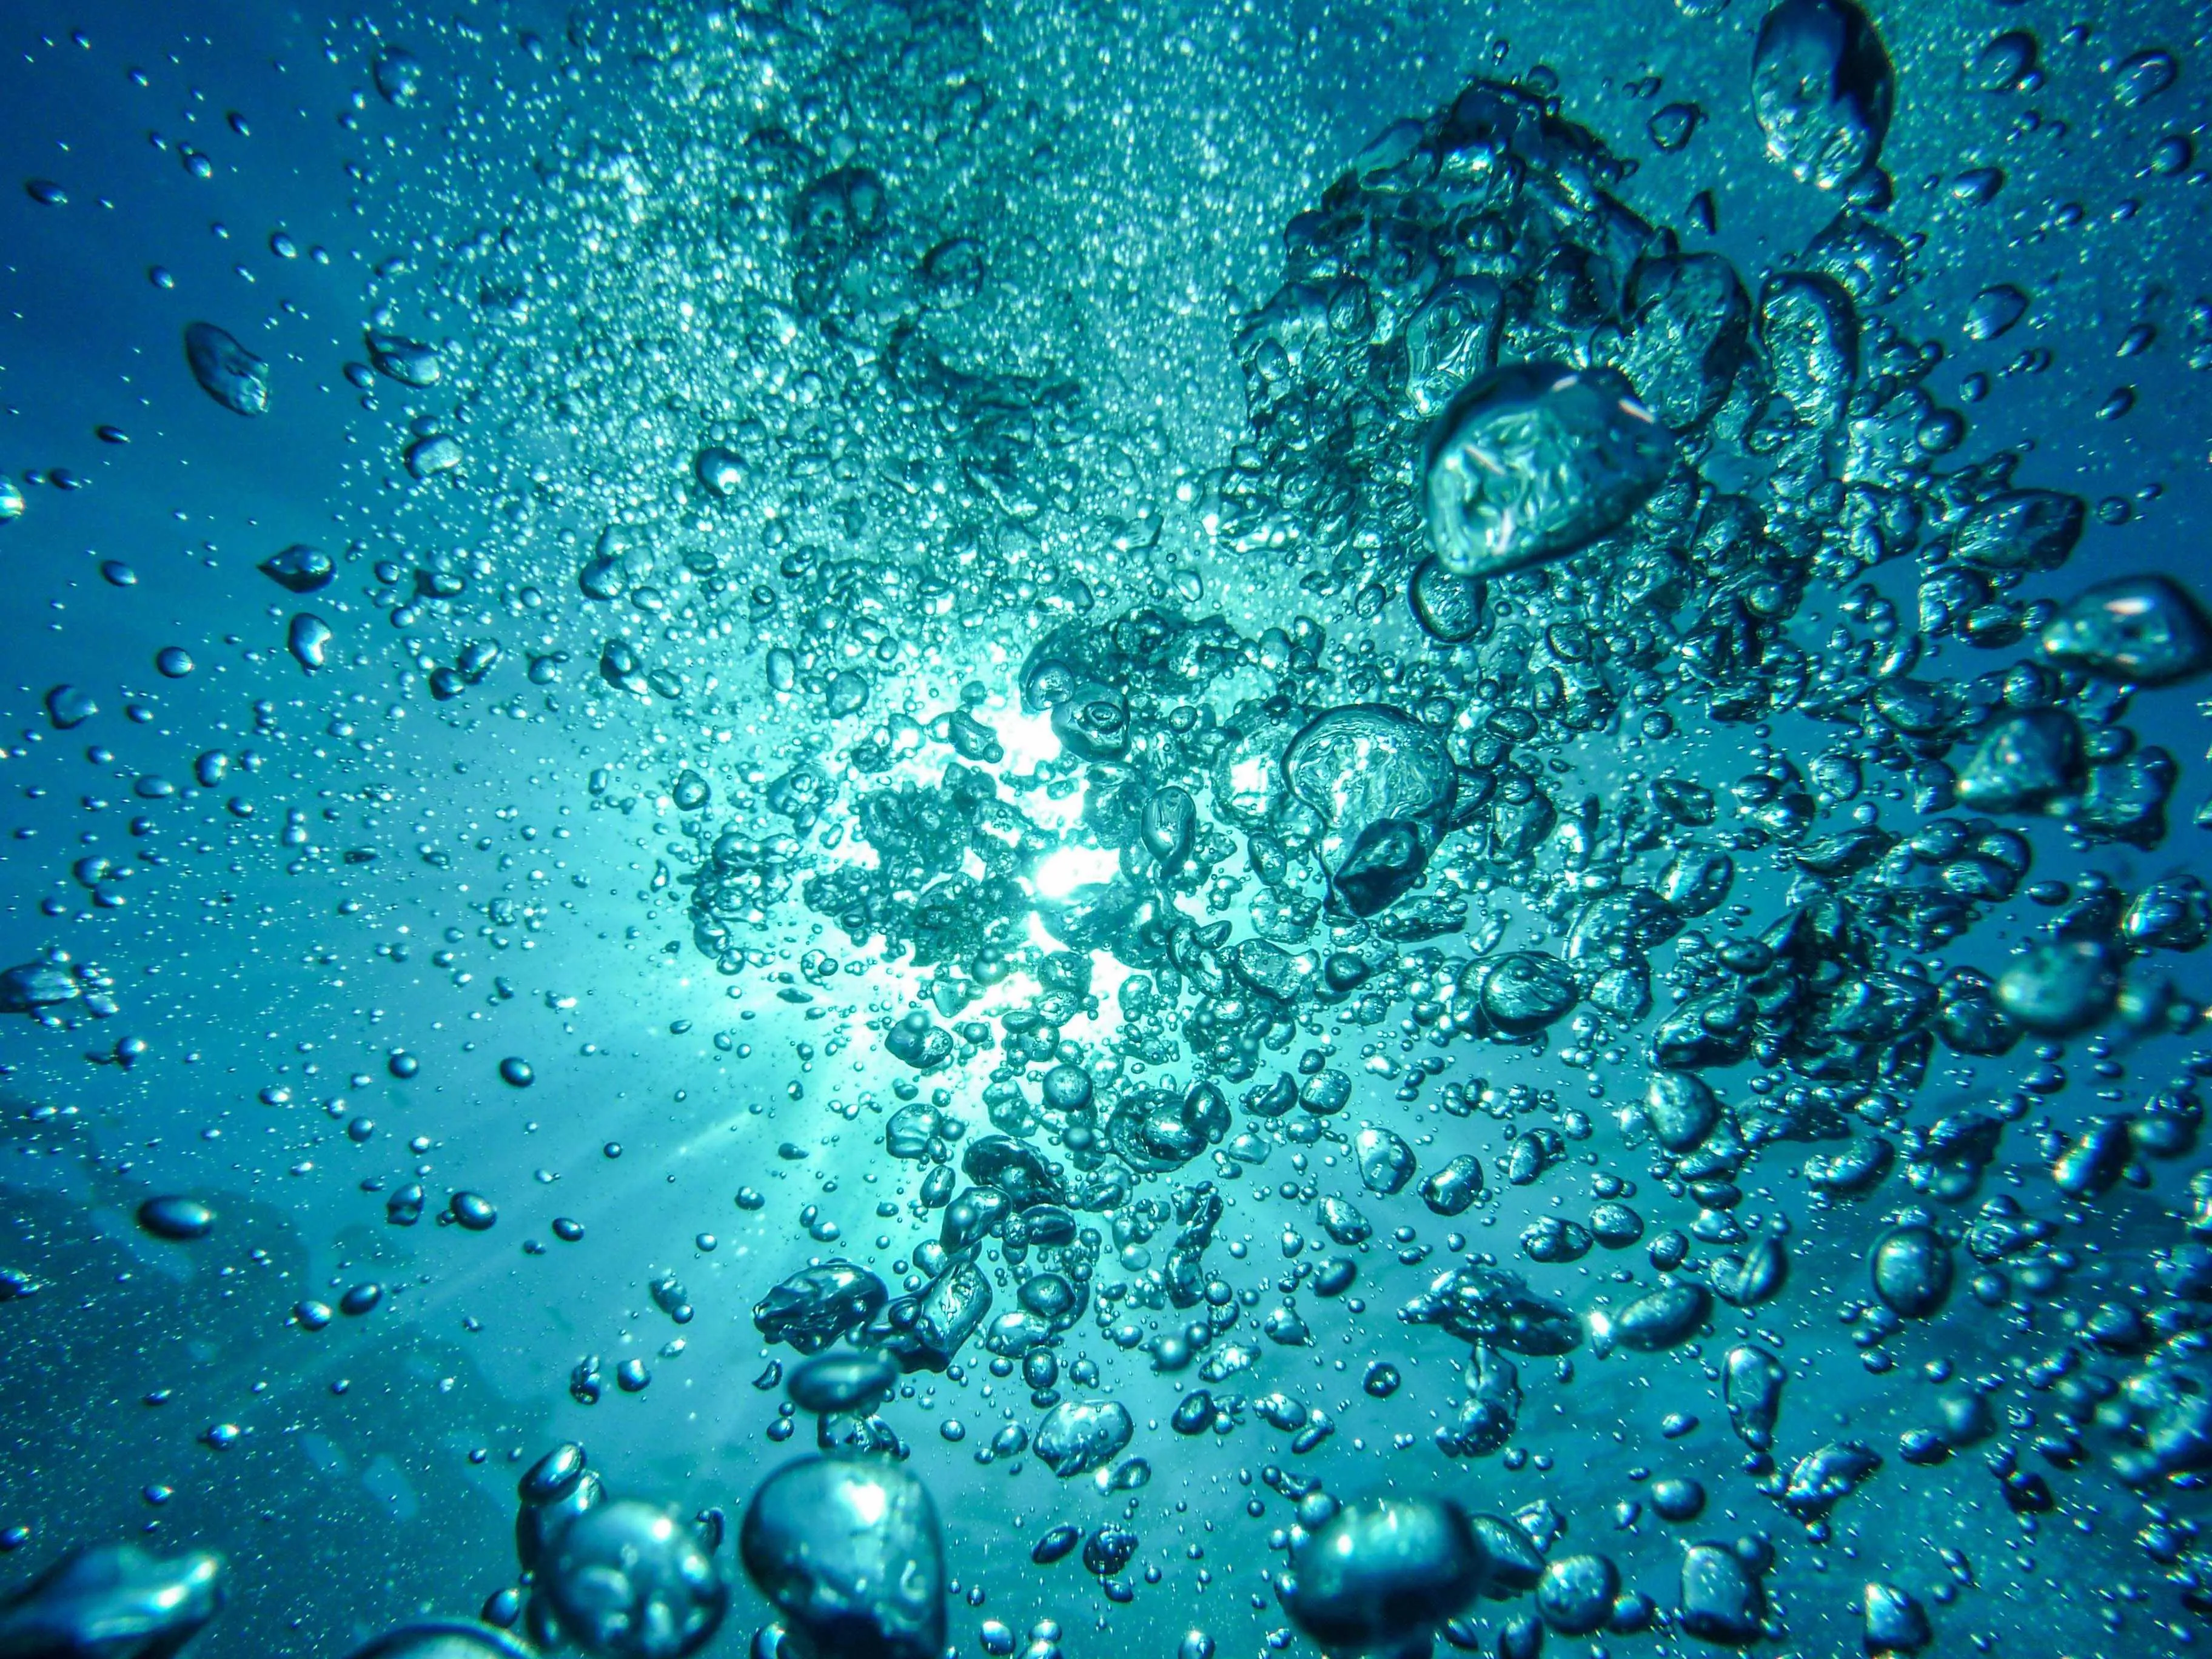 Category Image for Diving and Underwater Life